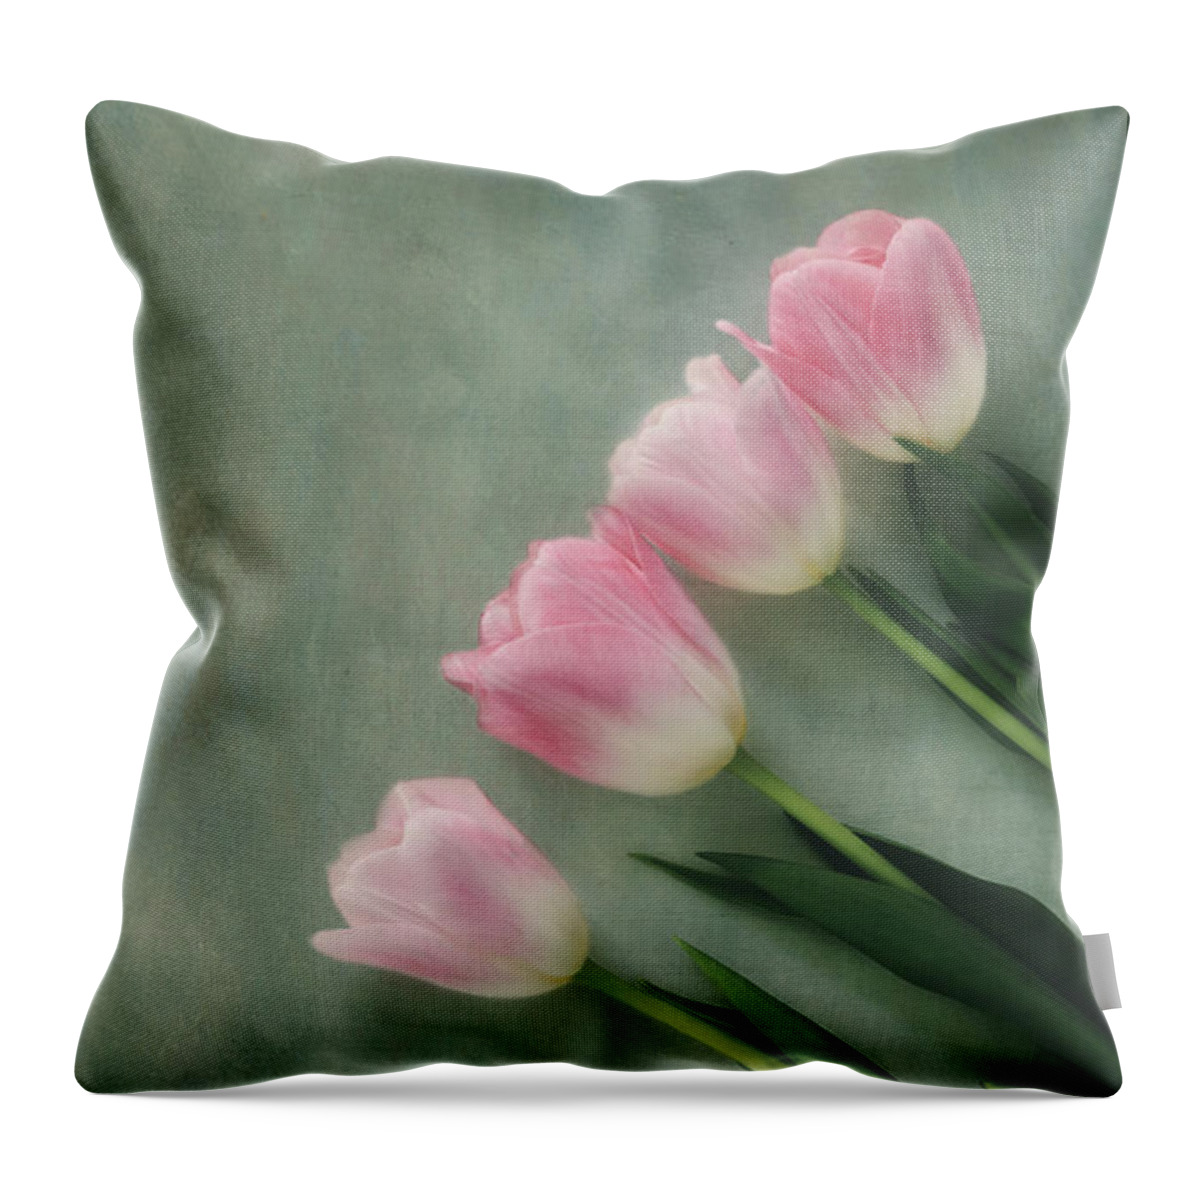 Tulip Throw Pillow featuring the photograph Four Pink Tulips by Kim Hojnacki